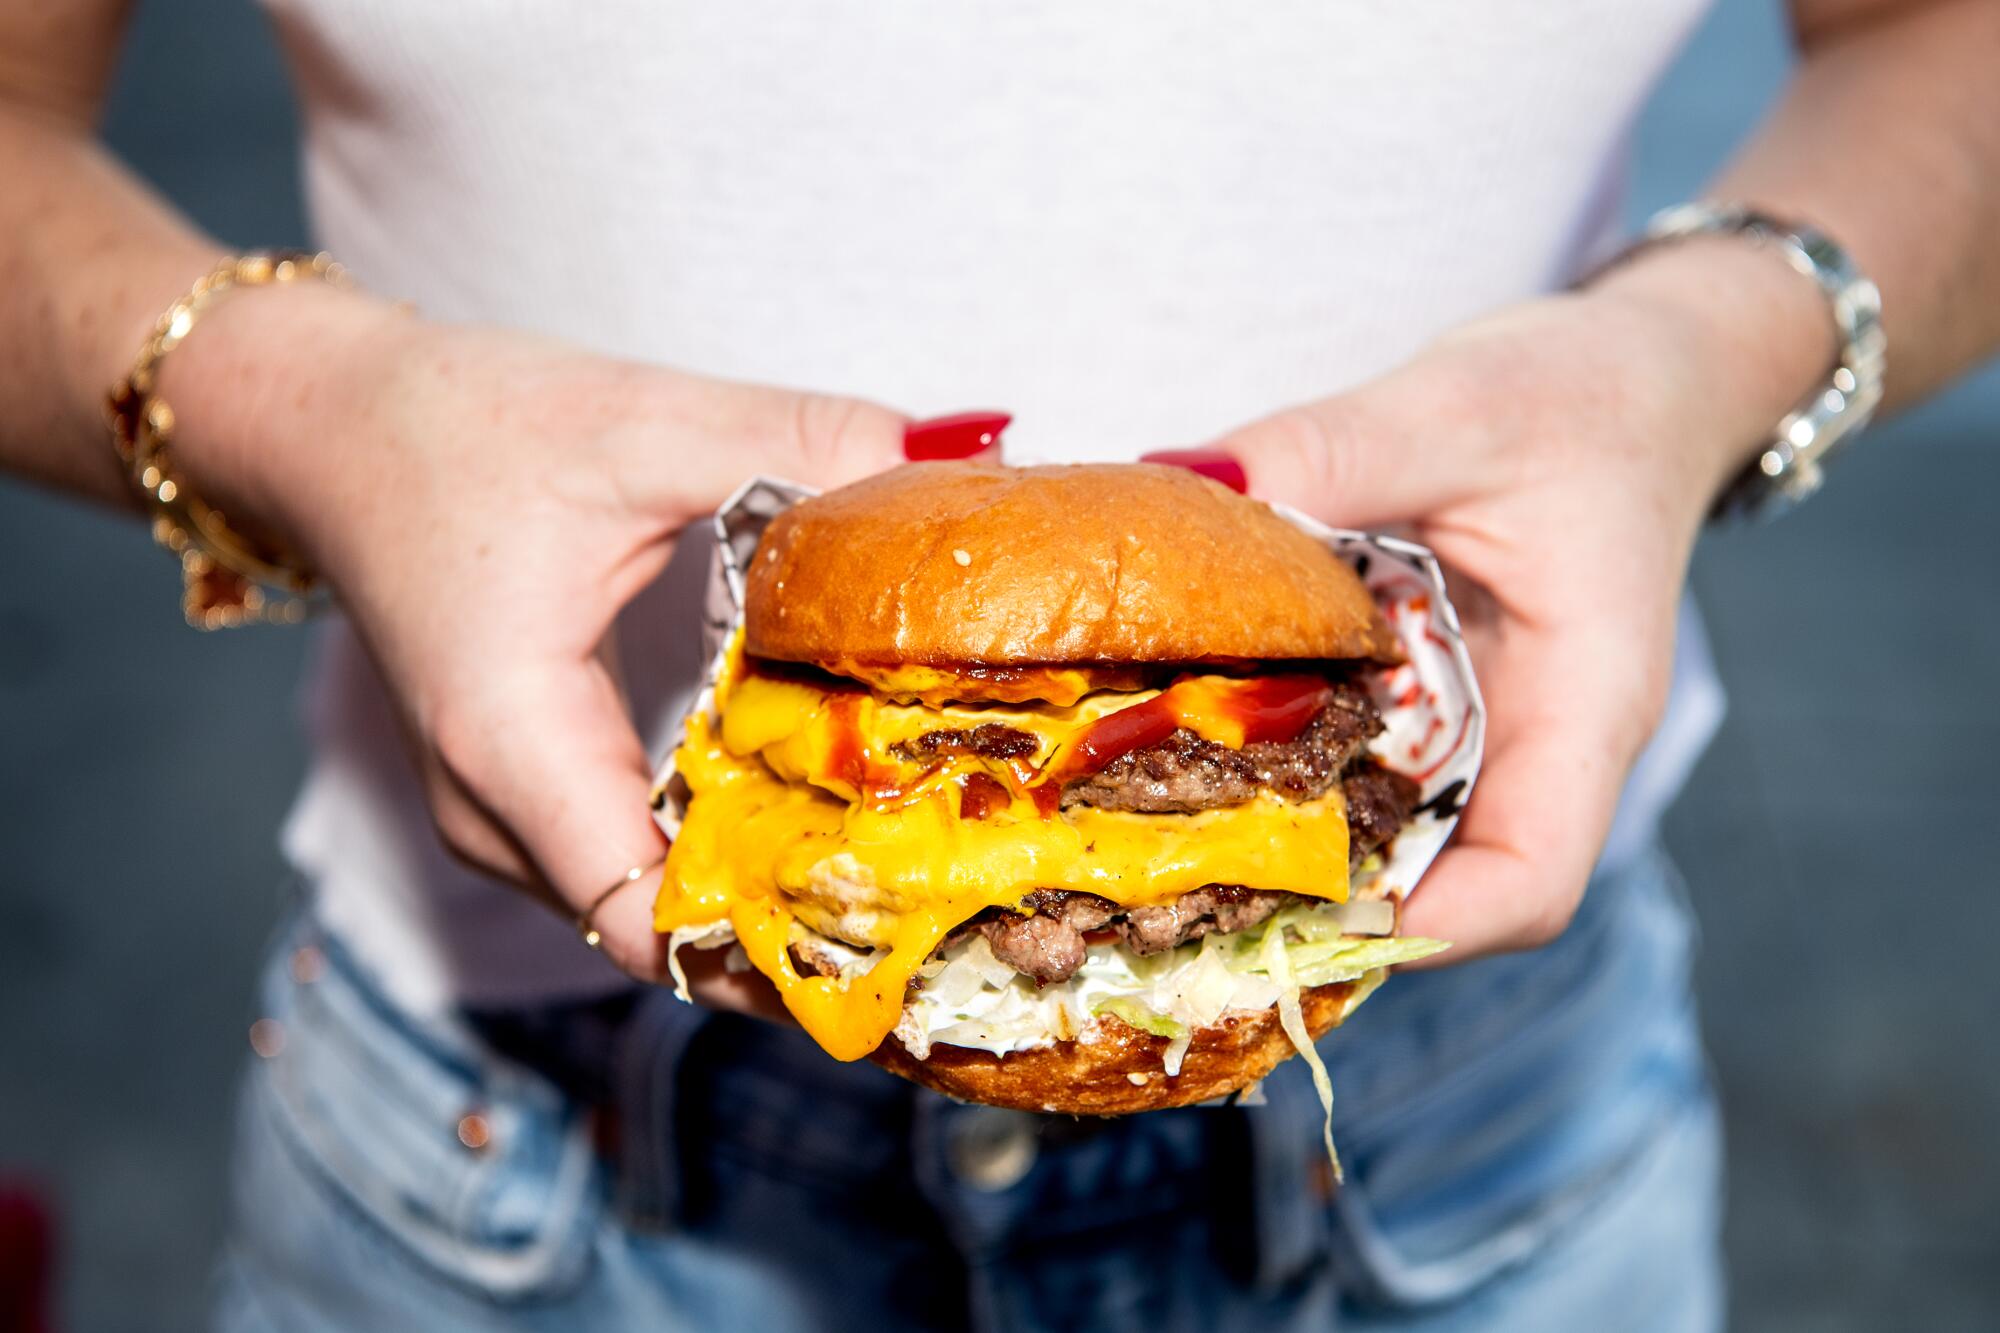 A closeup photo of a woman's hands holding a double cheeseburger oozing cheese and ketchup.